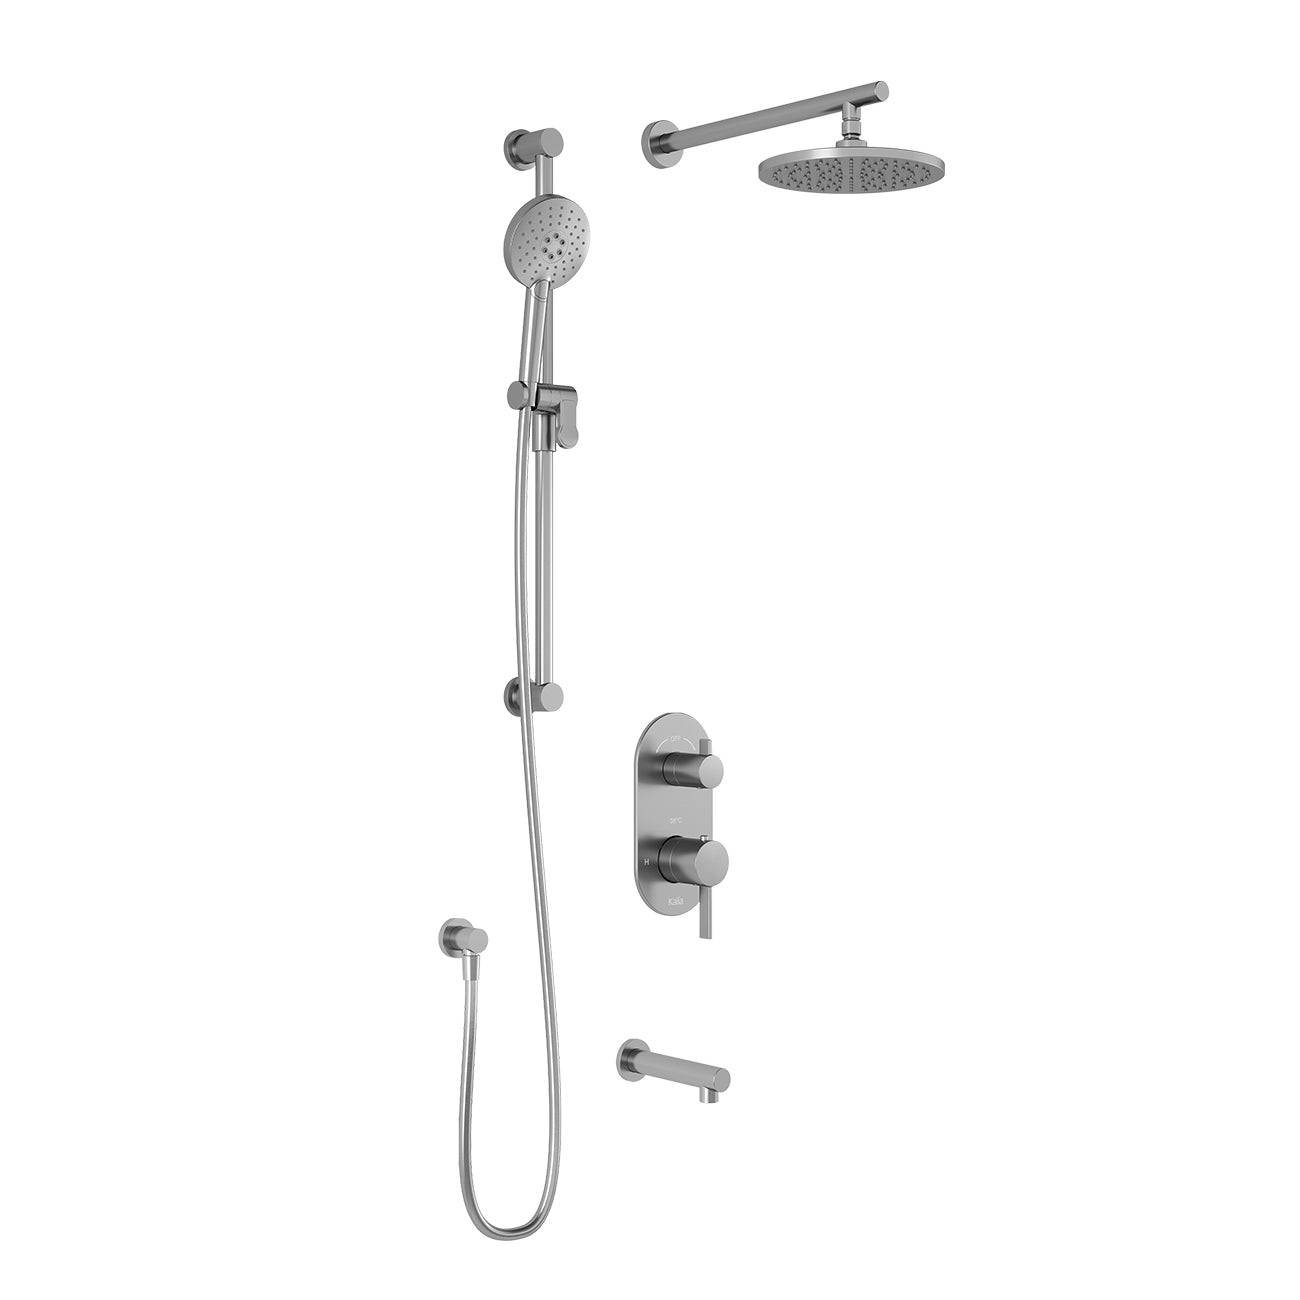 Kalia RoundOne TD3 (Valve Not Included) AQUATONIK T/P with Diverter Shower System with Wall Arm (BF1643)